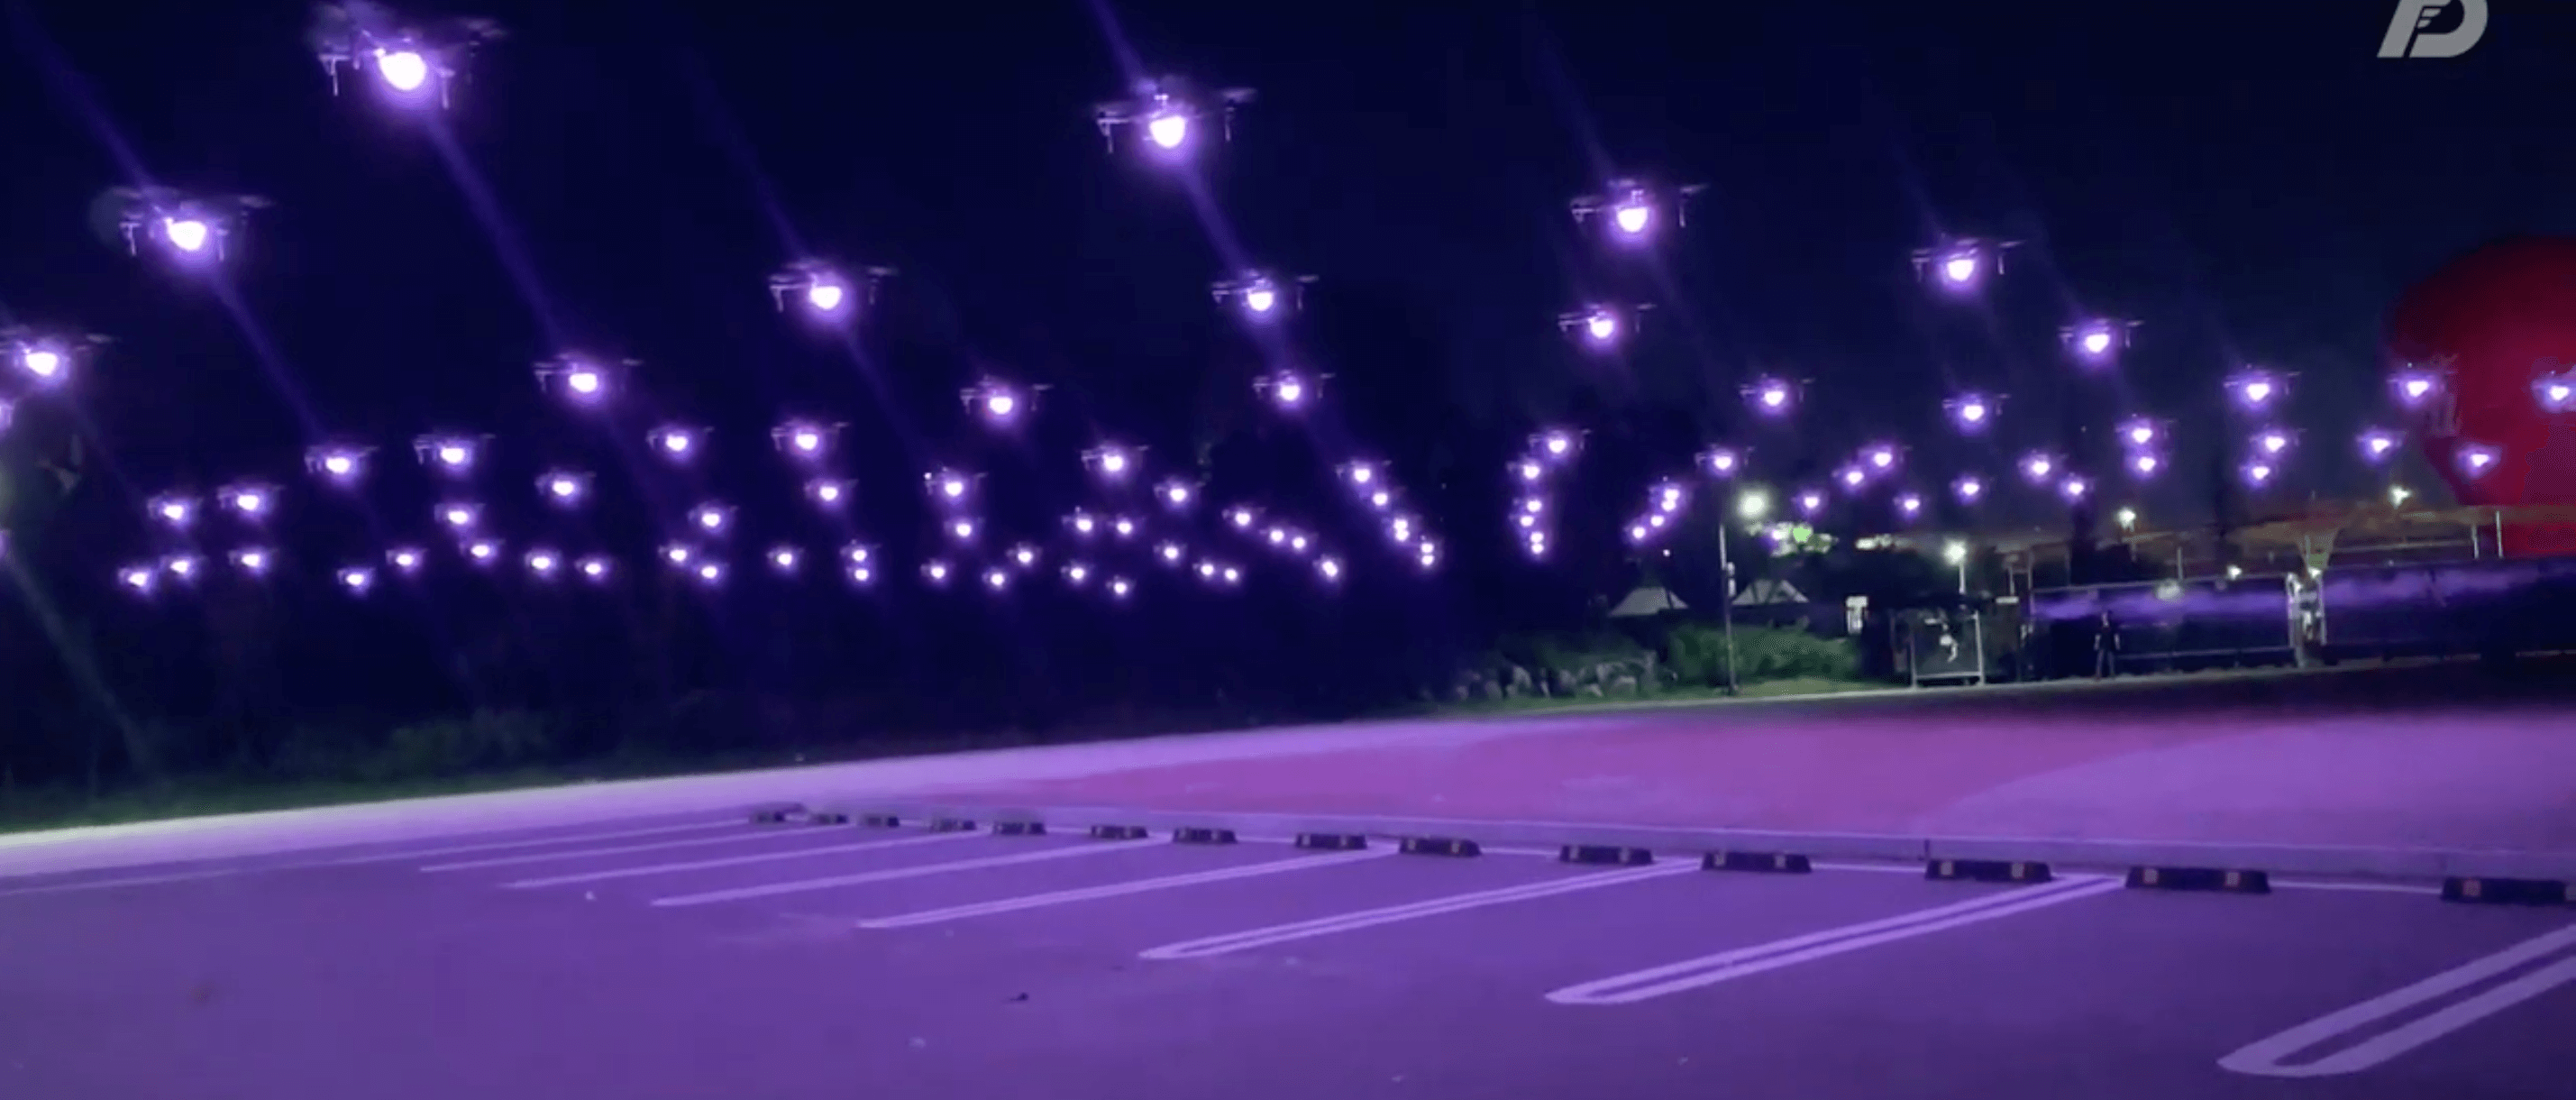 LED light Drone FLASHING Entertainment for Events